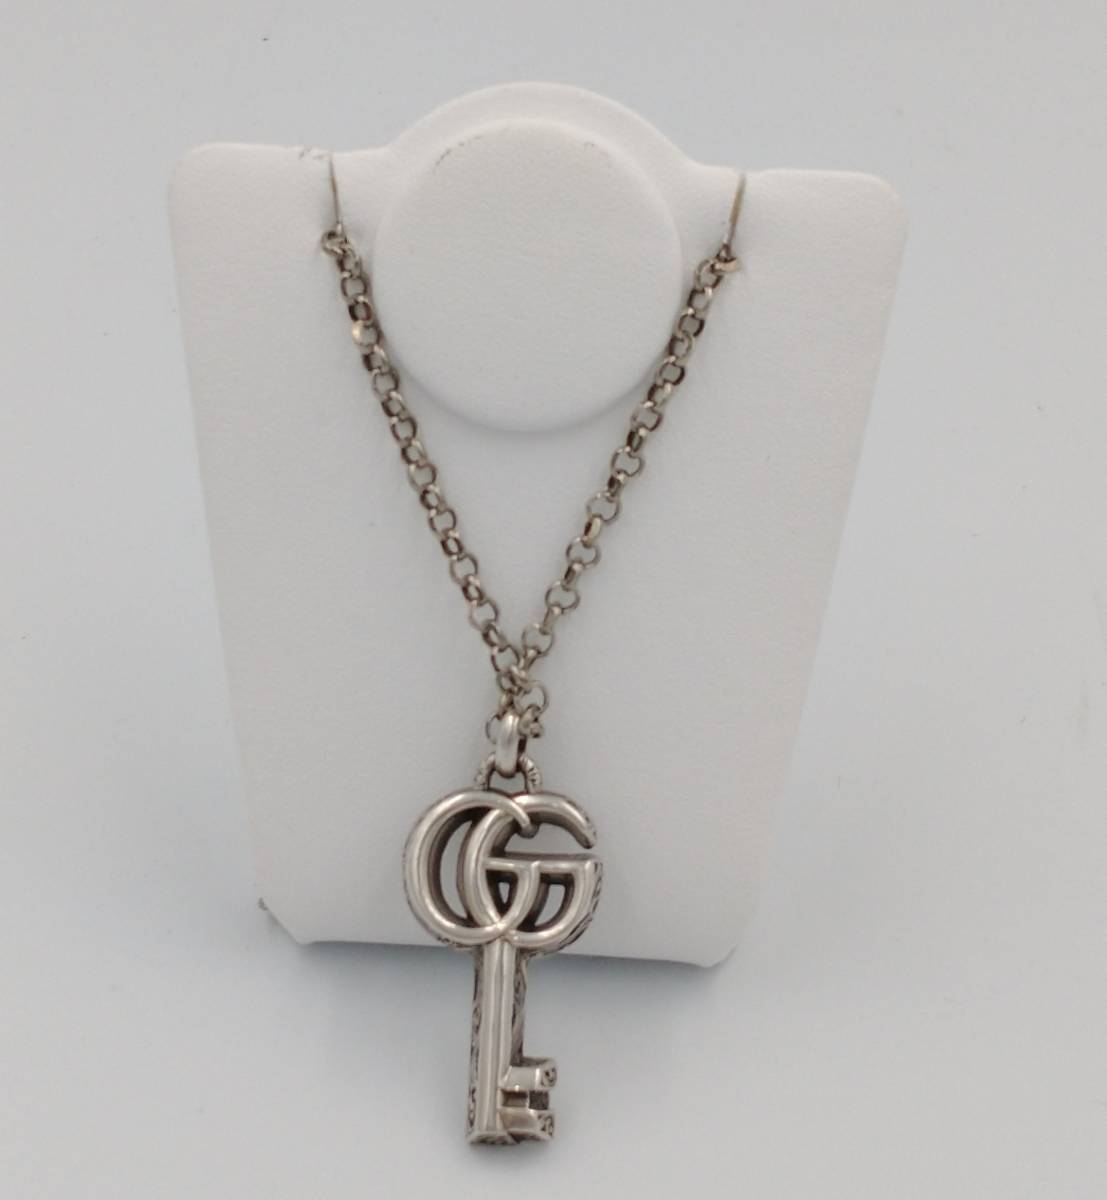 GUCCI DOUBLE G NECKLACE ネックレス GGロゴ 925刻印 グッチ - growingup-group.com